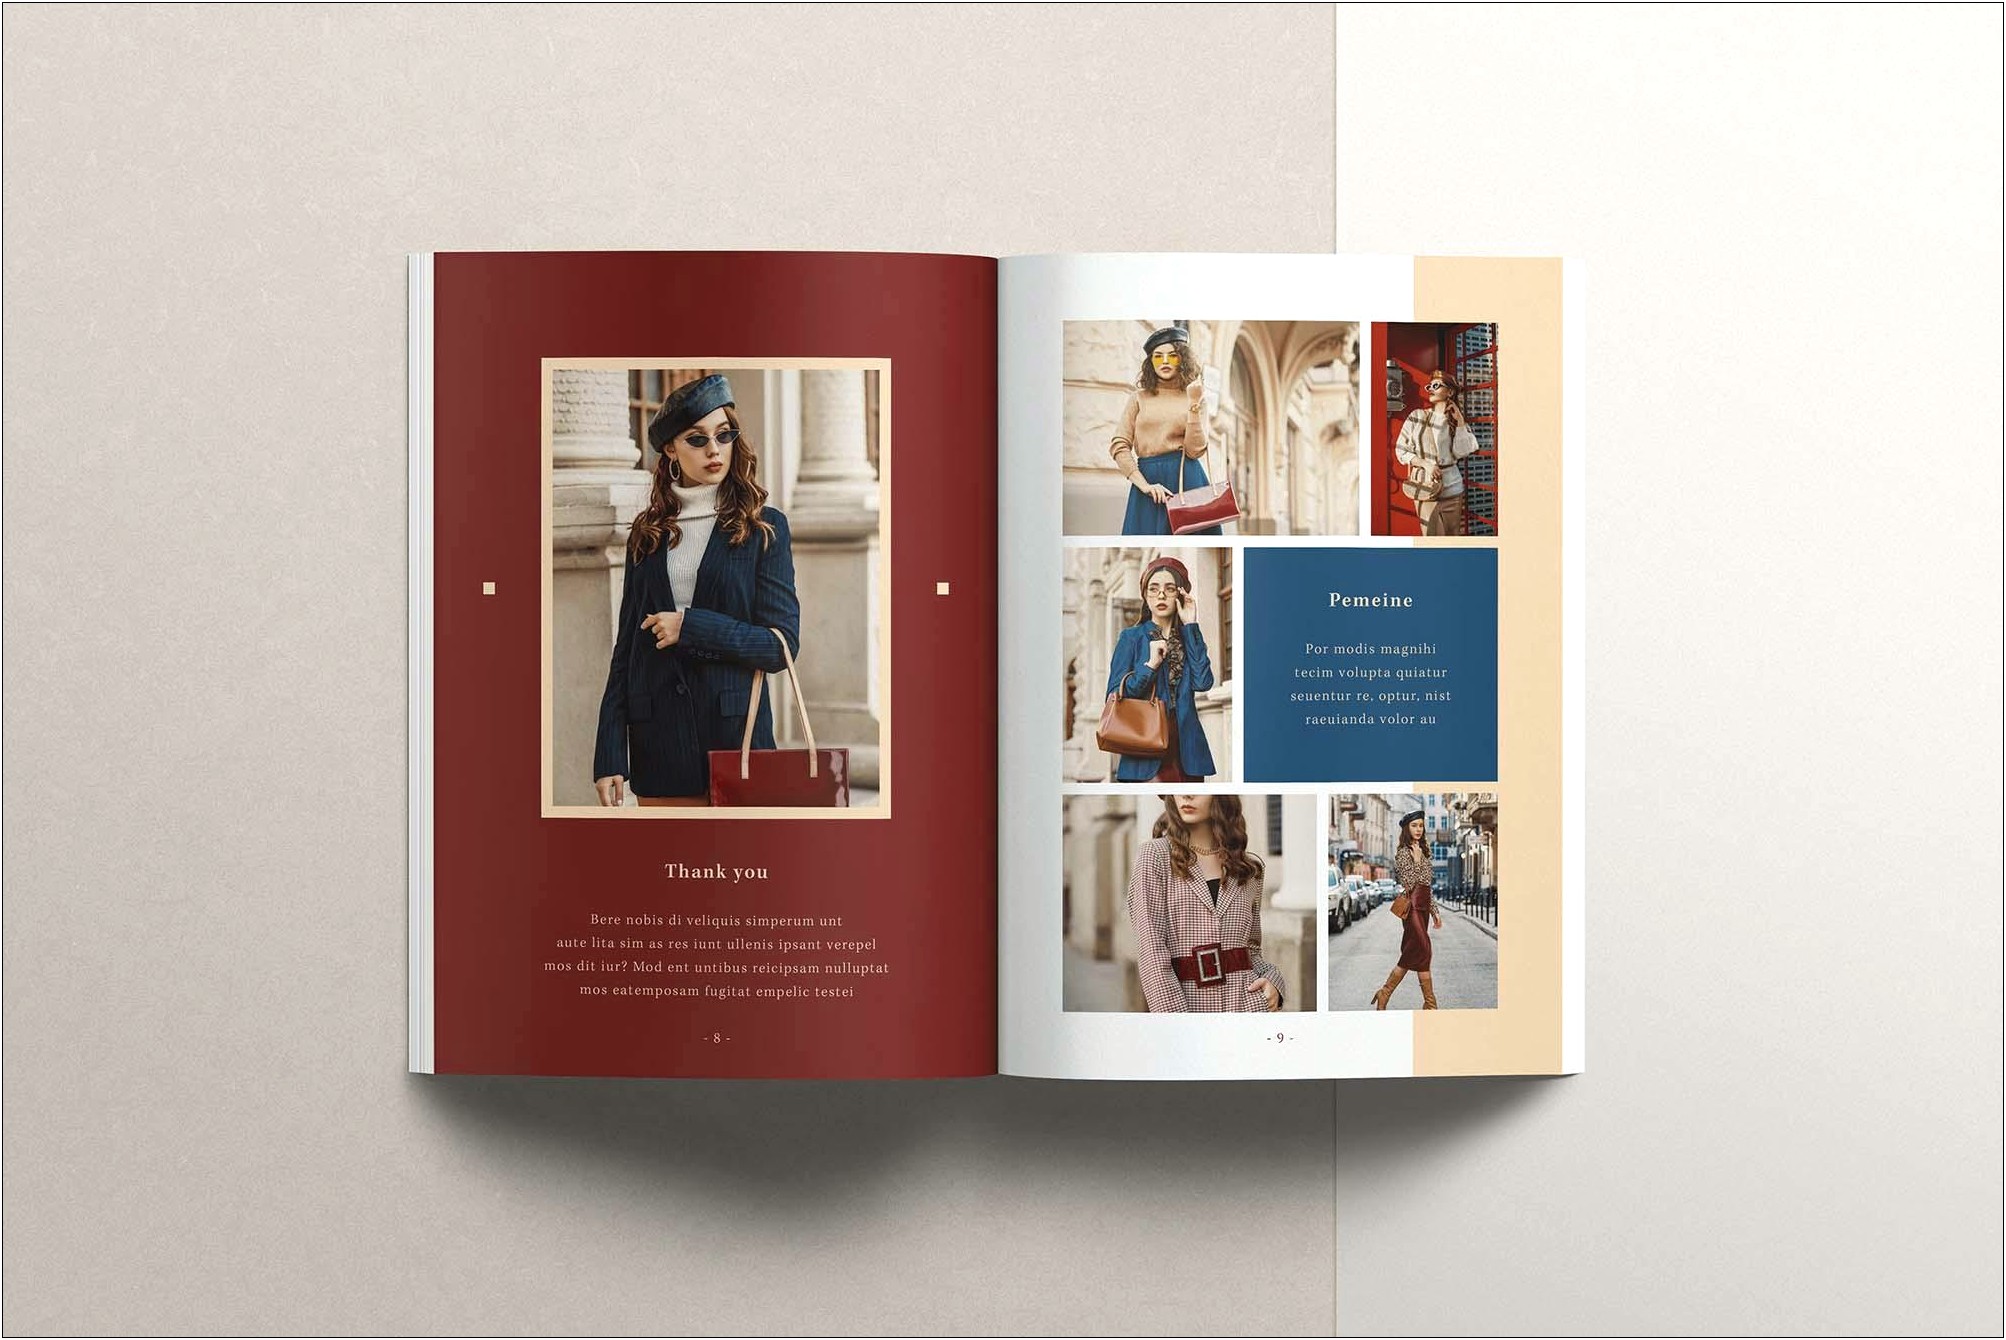 free-adobe-indesign-magazine-layout-template-resume-example-gallery